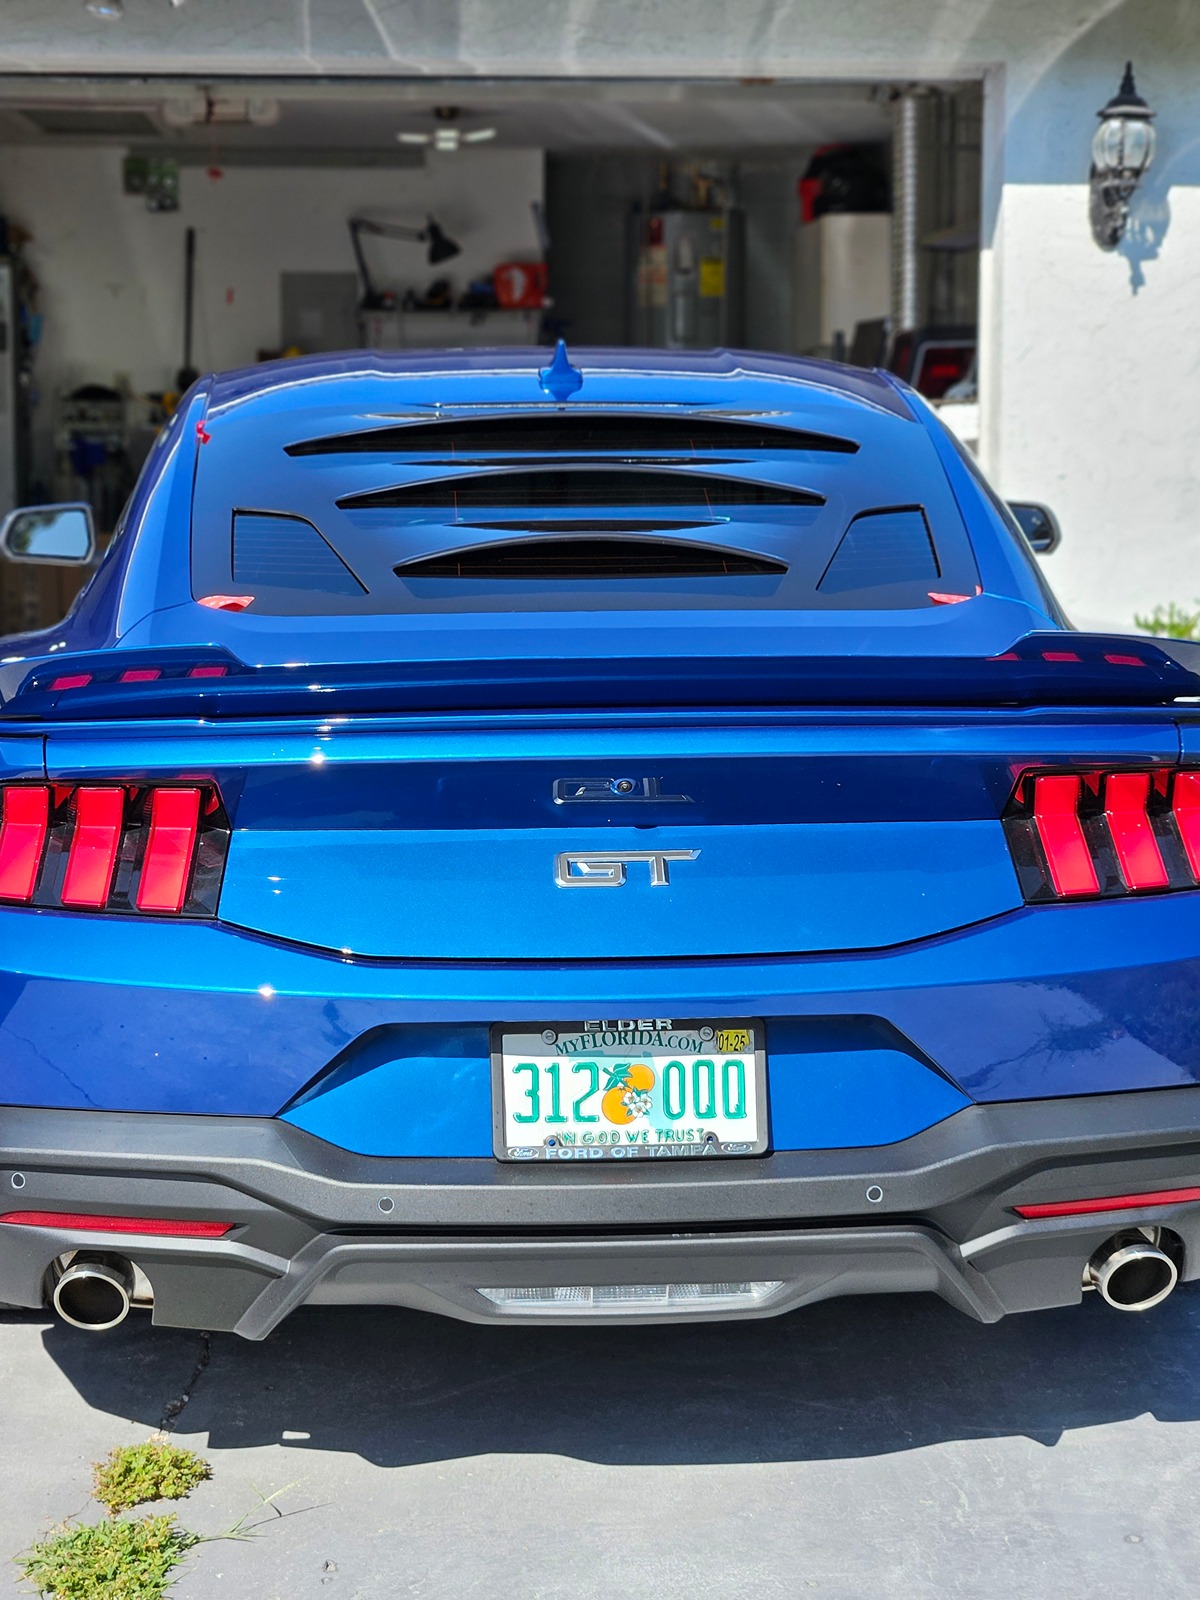 S650 Mustang Mmd duck tail from s550 on an s650 fitment check 1000000649